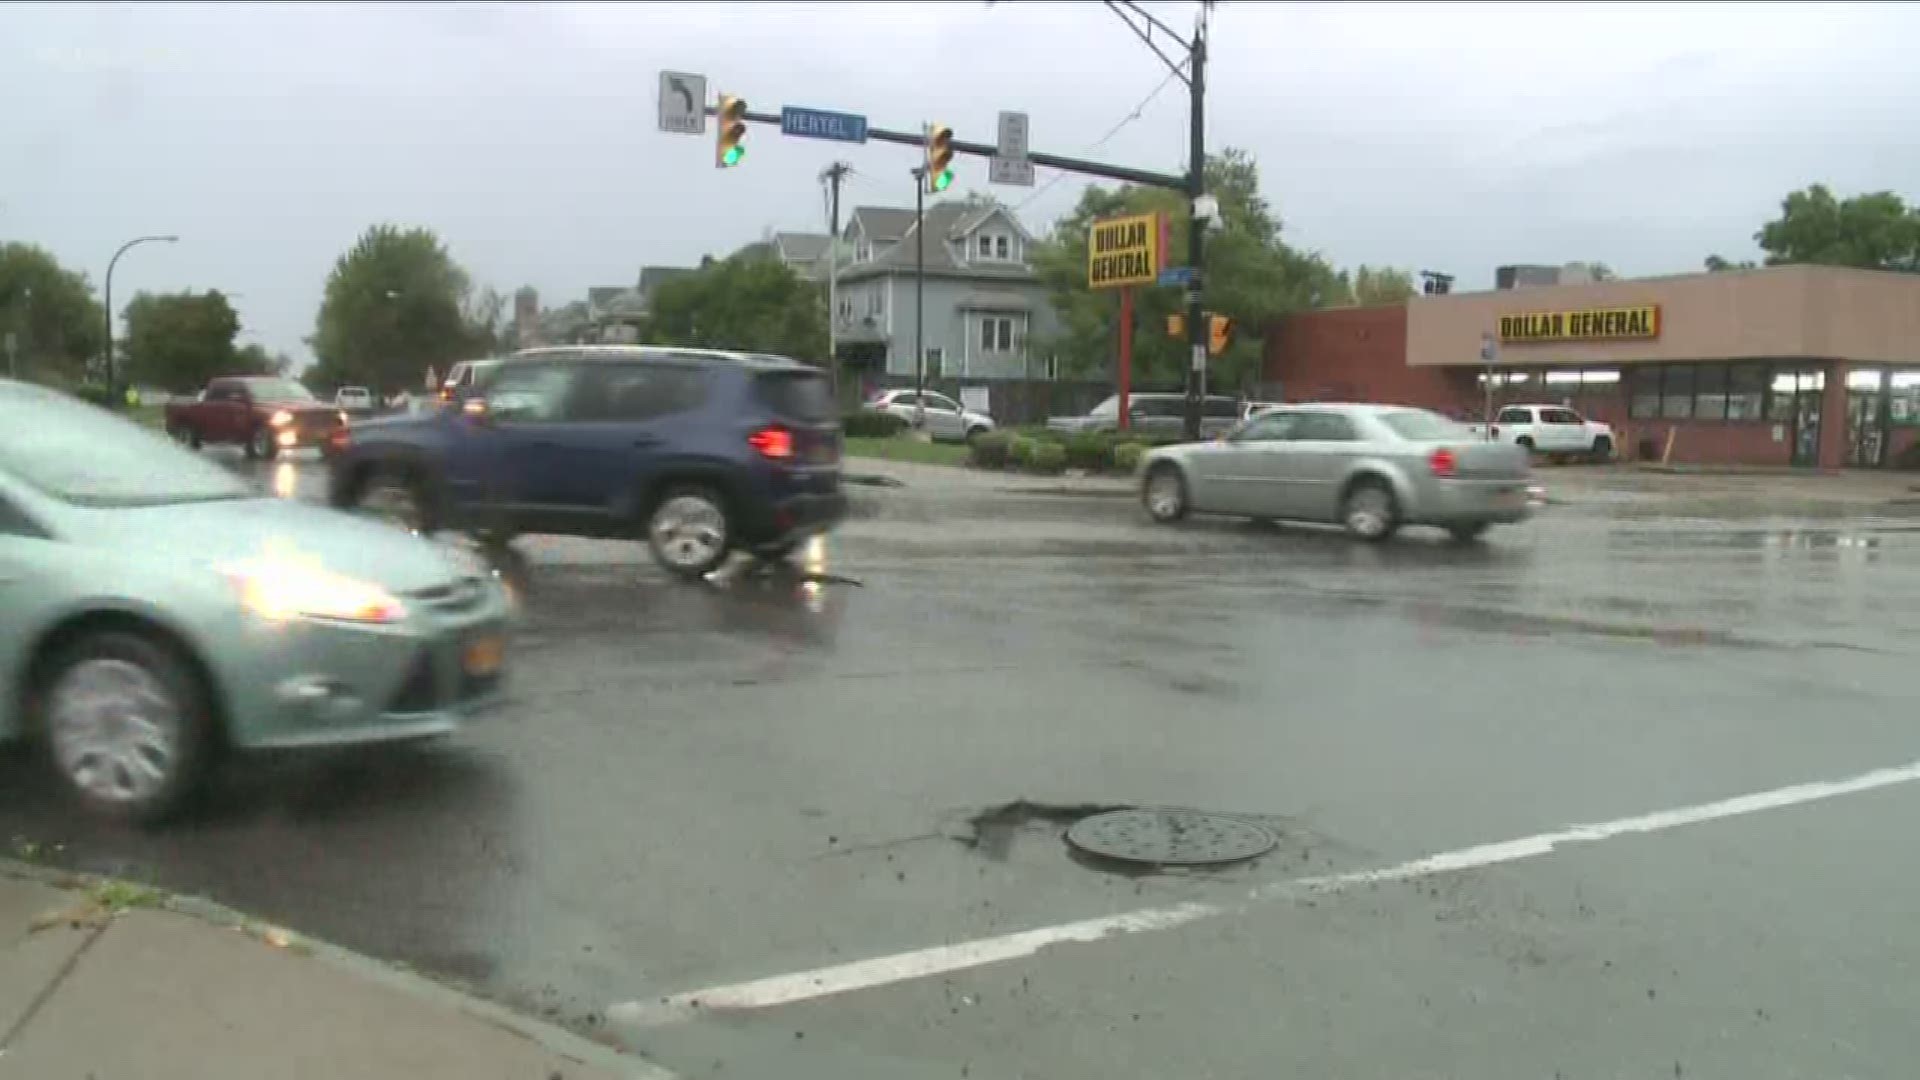 A lot of people have been expressing concerns about the road conditions in North Buffalo.